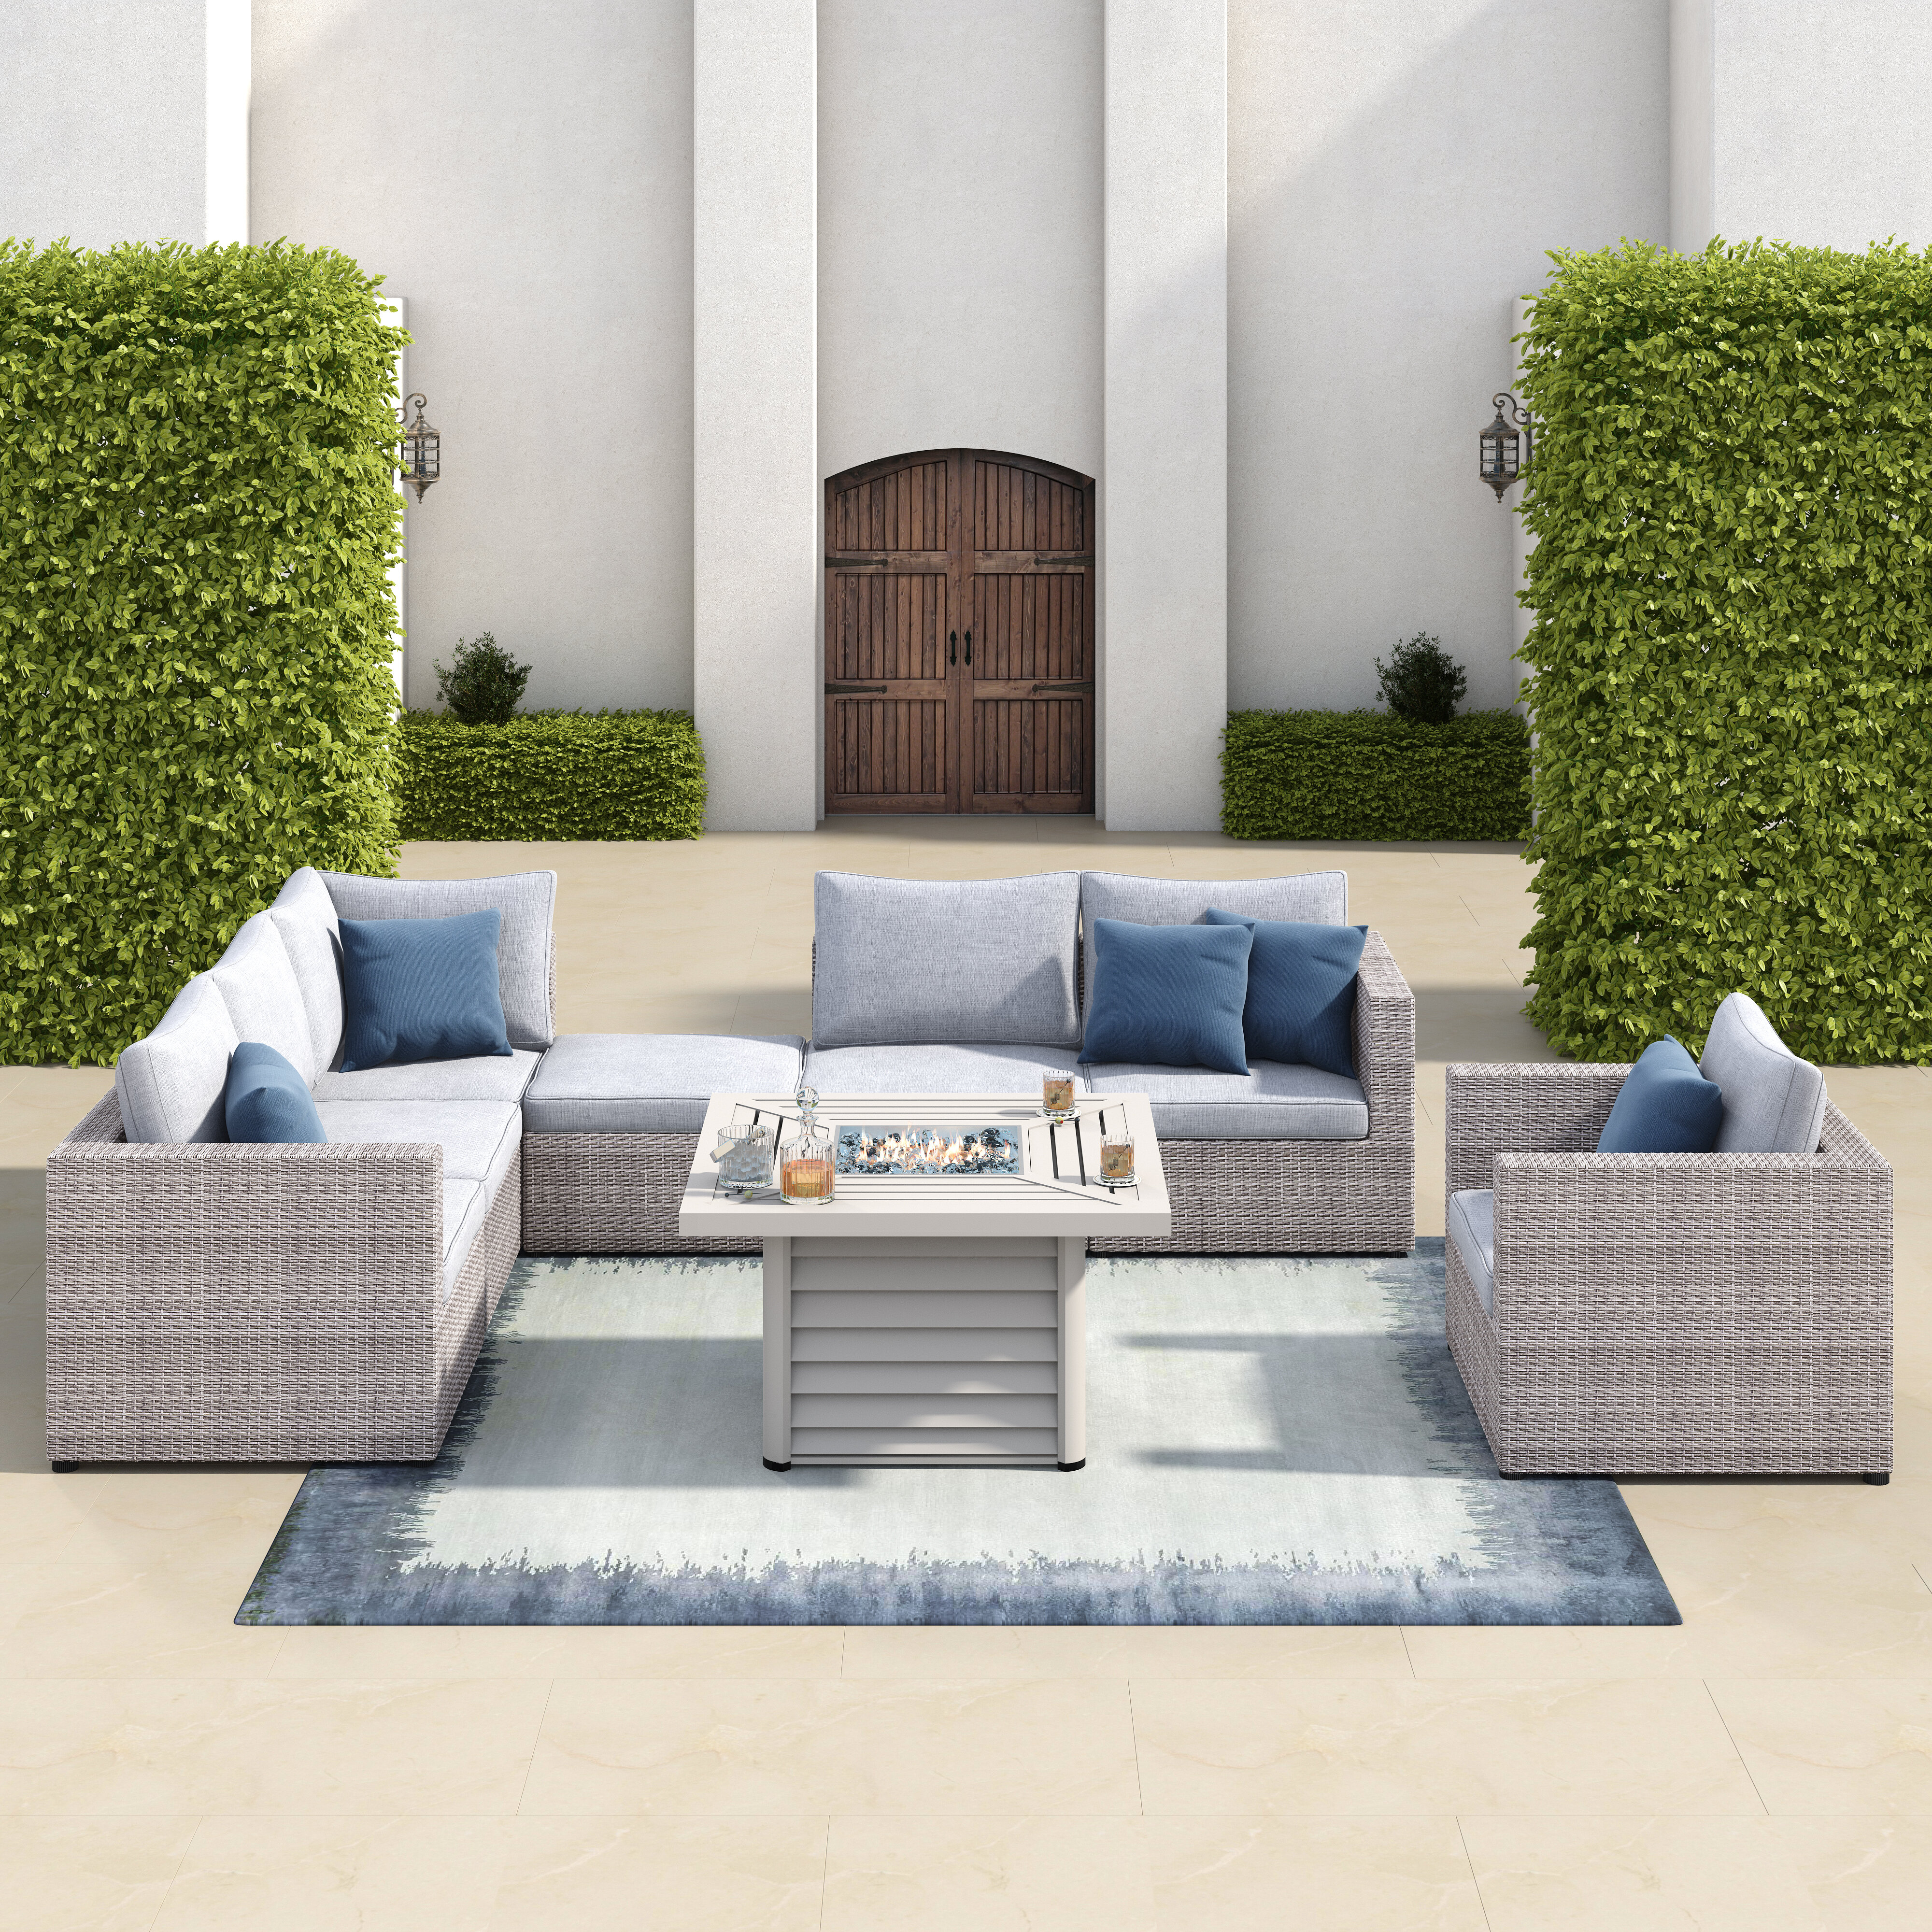 Navy Ottoman.All-Weather Miami White Wicker Powder Coated Aluminum Frame Feet Levellers Navy Ottoman with Cushion